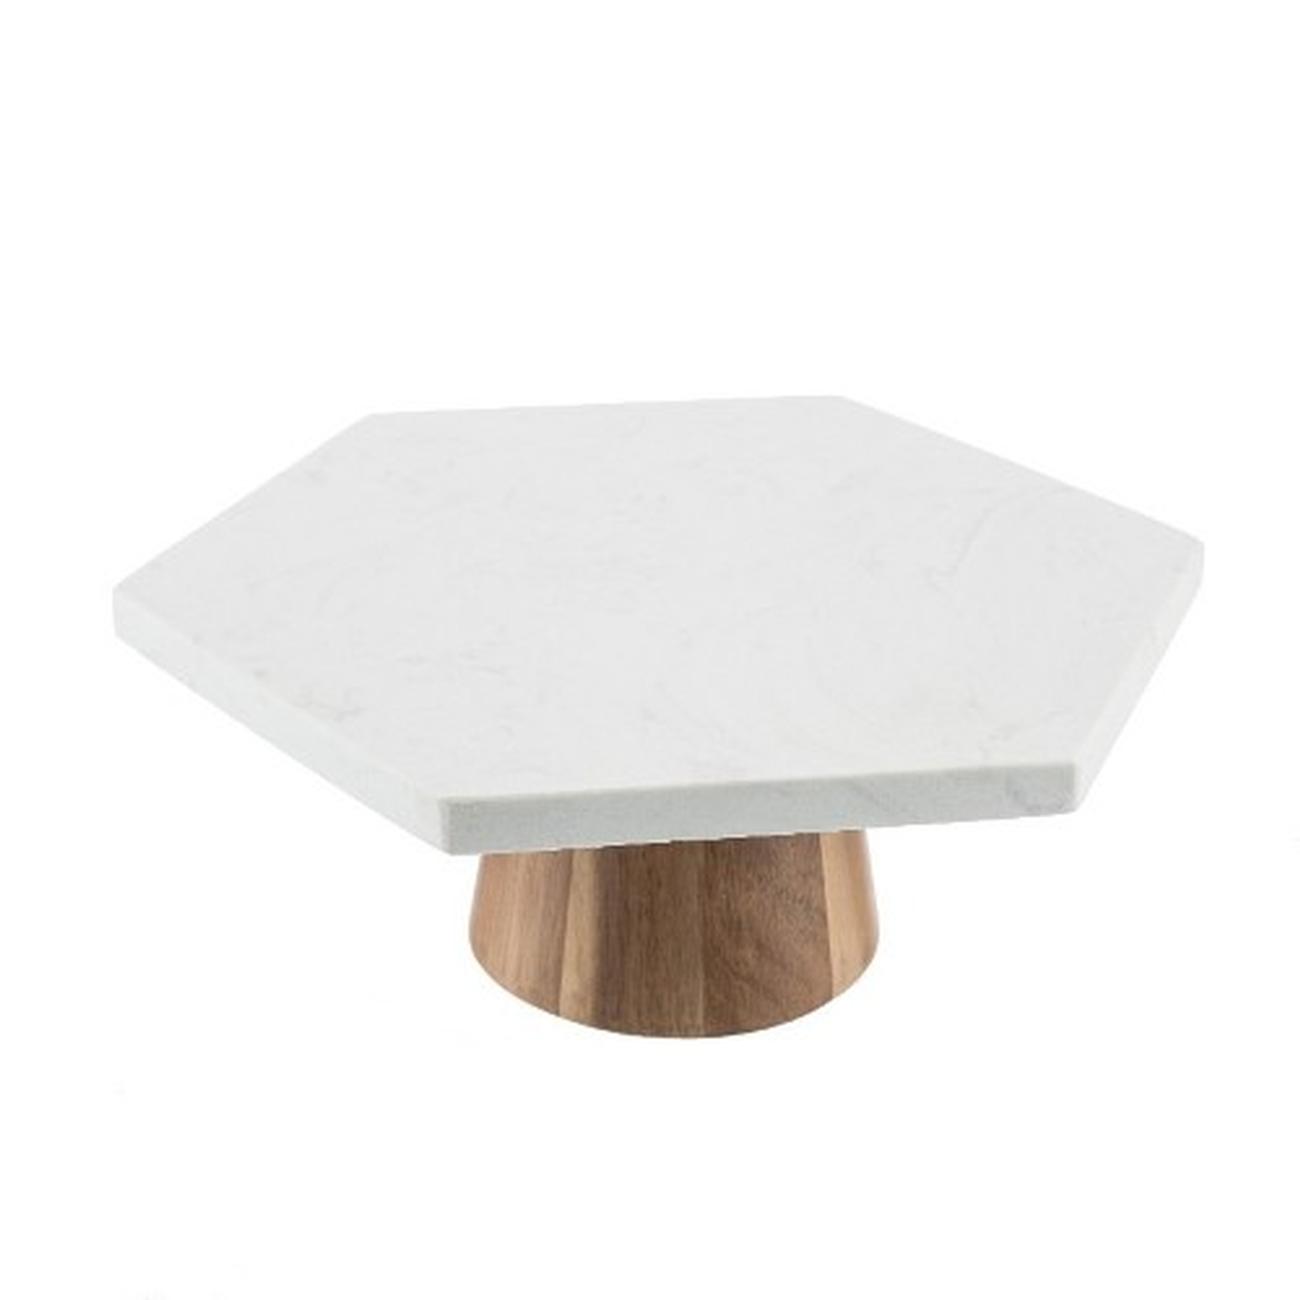 kitchen-pantry-acacia-marble-cake-stand - Kitchen Pantry Acacia Wood & Marble Cake Stand